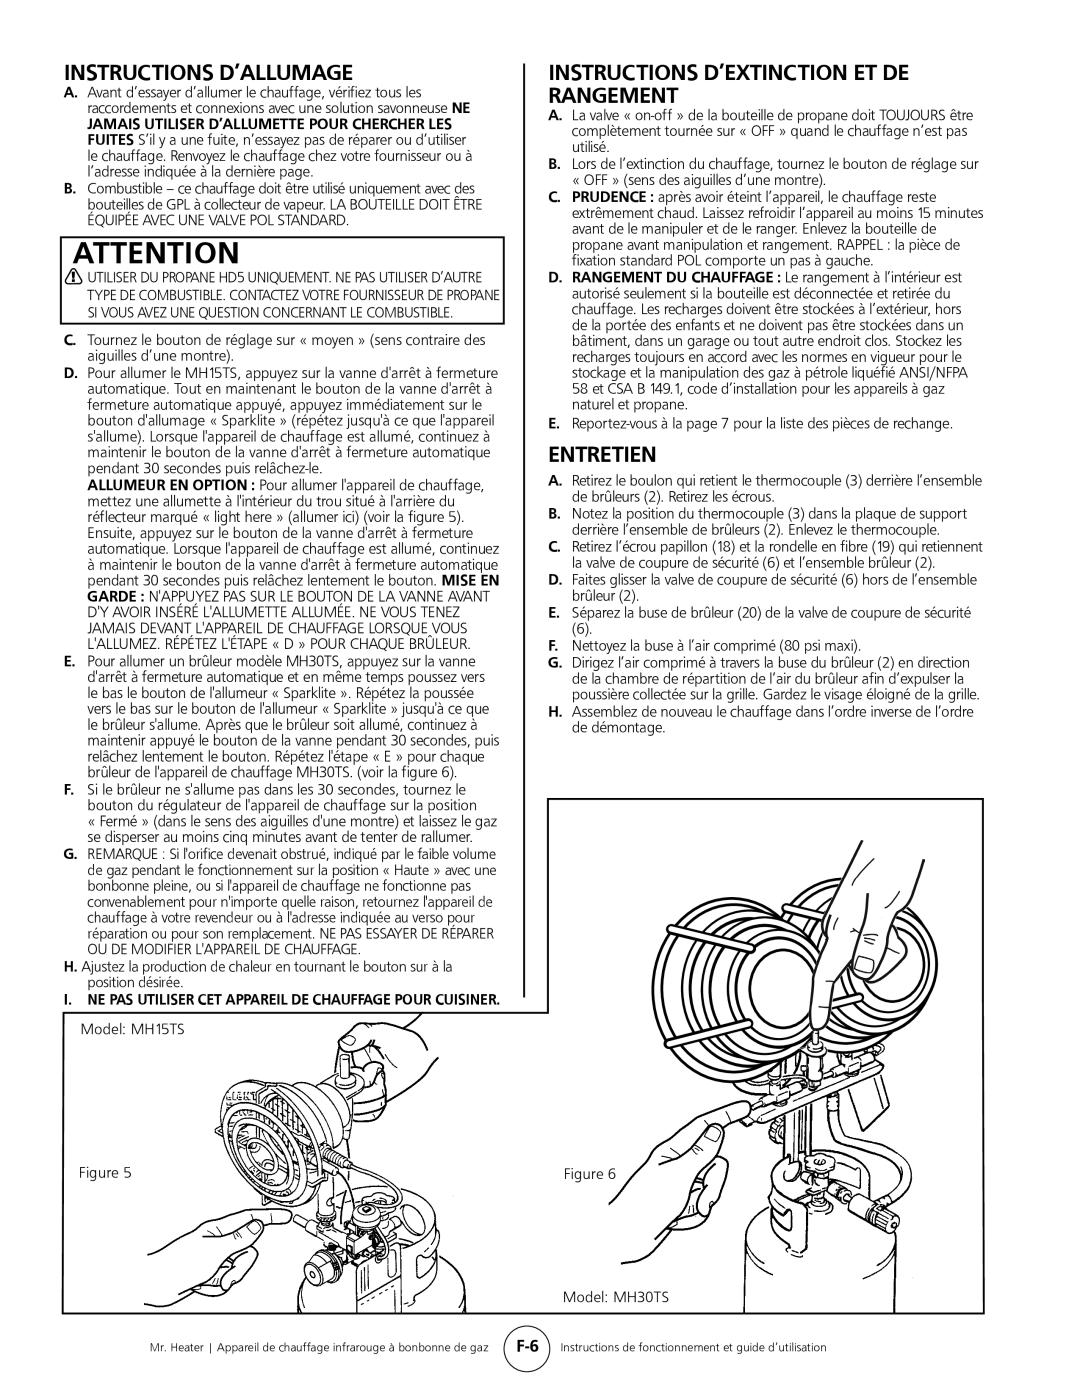 Mr. Heater MH15tS operating instructions Instructions D’Allumage, Instructions D’Extinction Et De Rangement, Entretien 